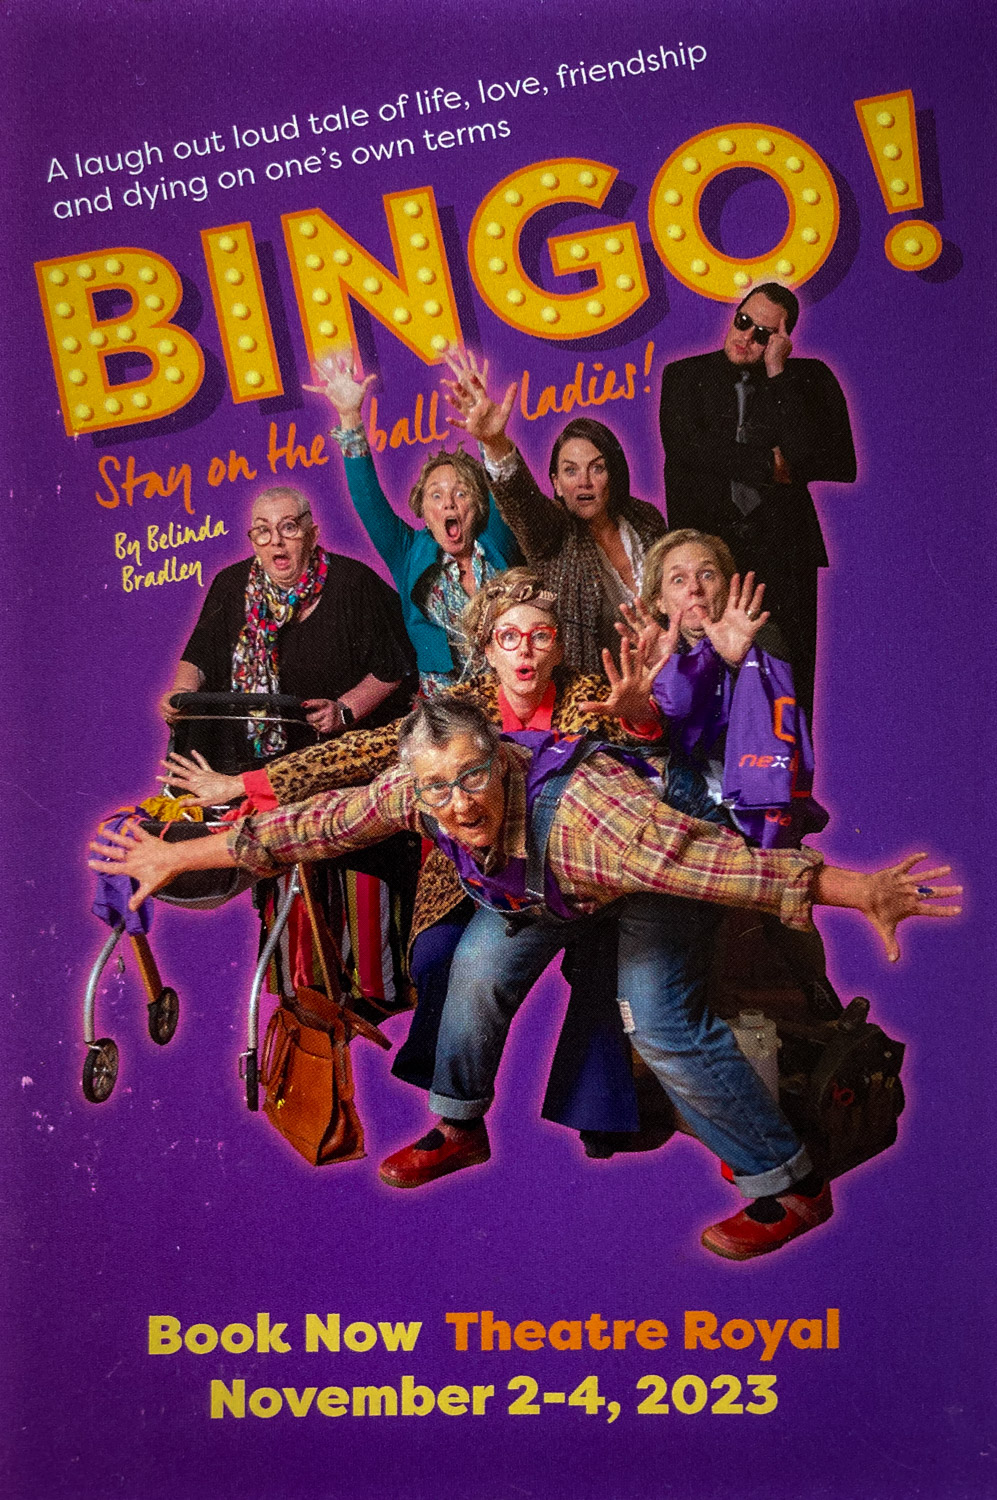 A poster for a play called Bingo! With a cast of six women, and a man dressed in black, on a purple background